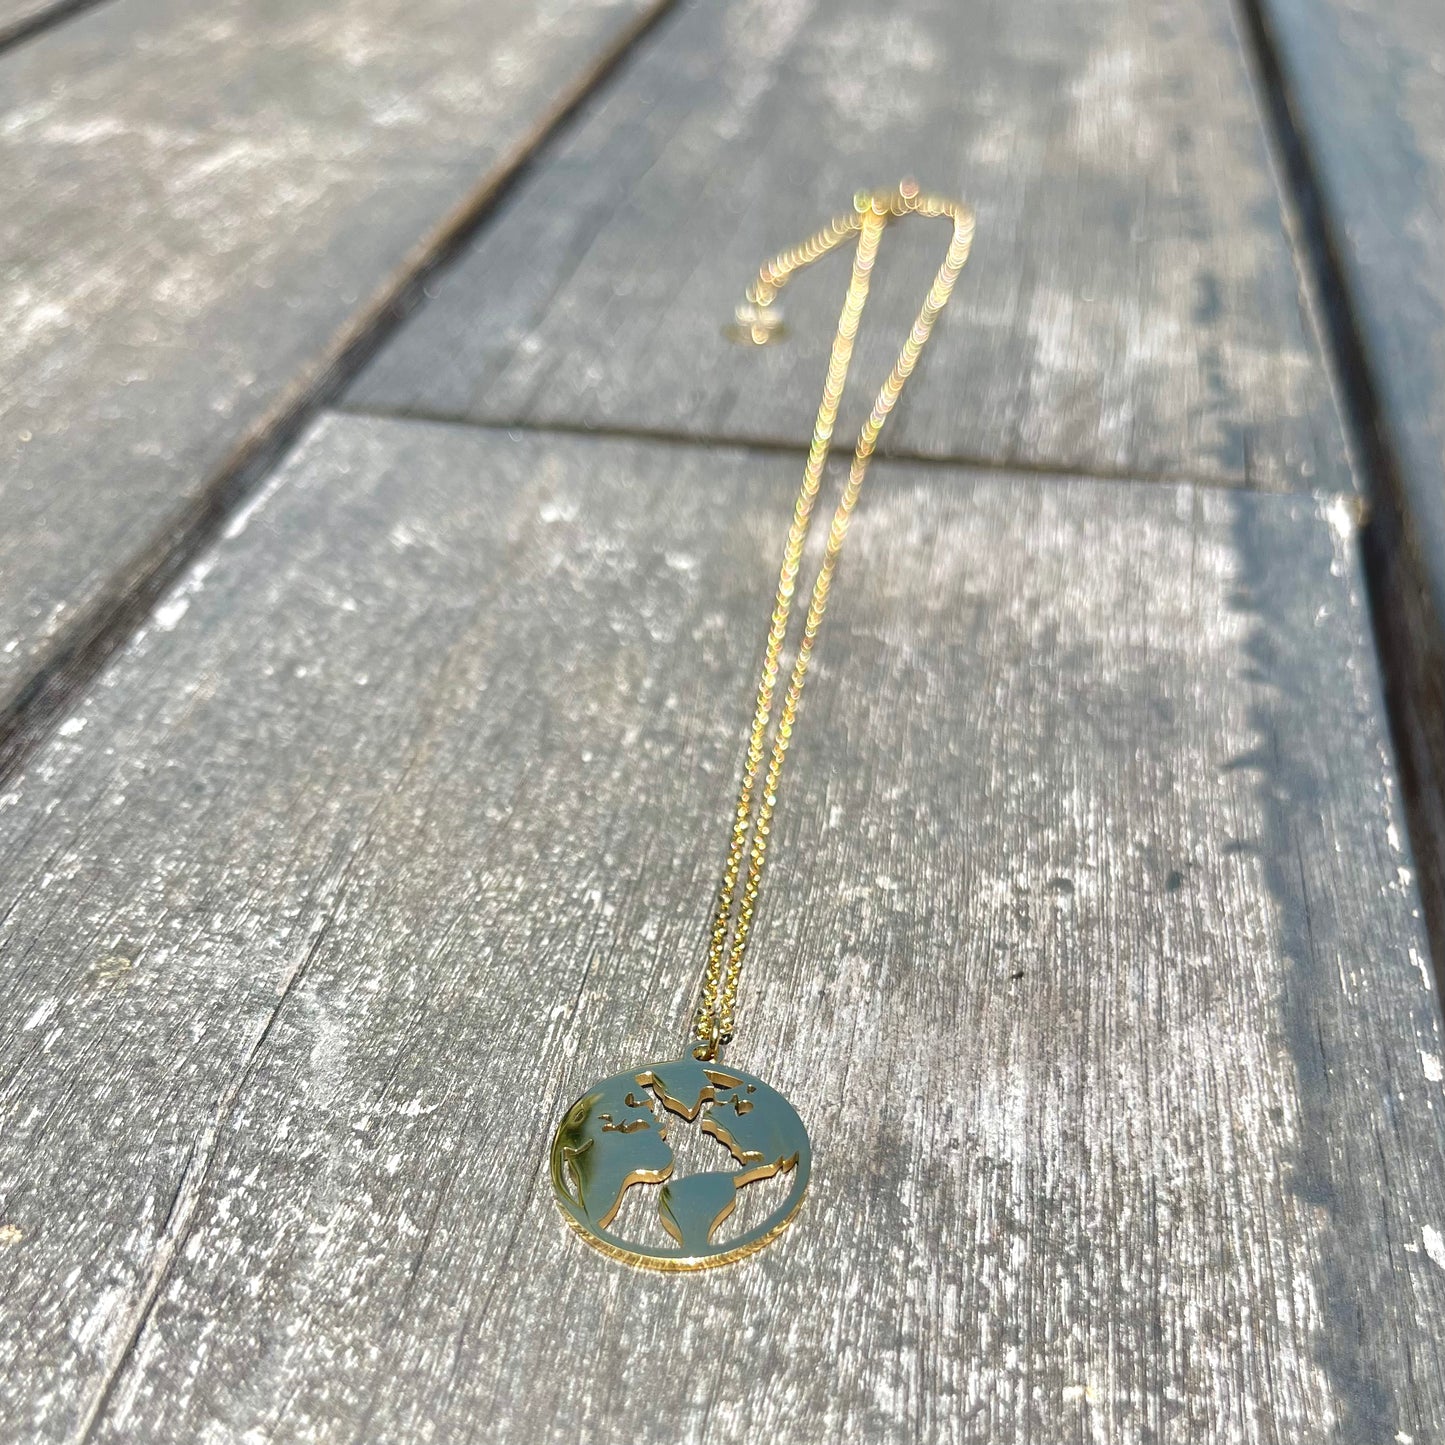 A New Earth Necklace